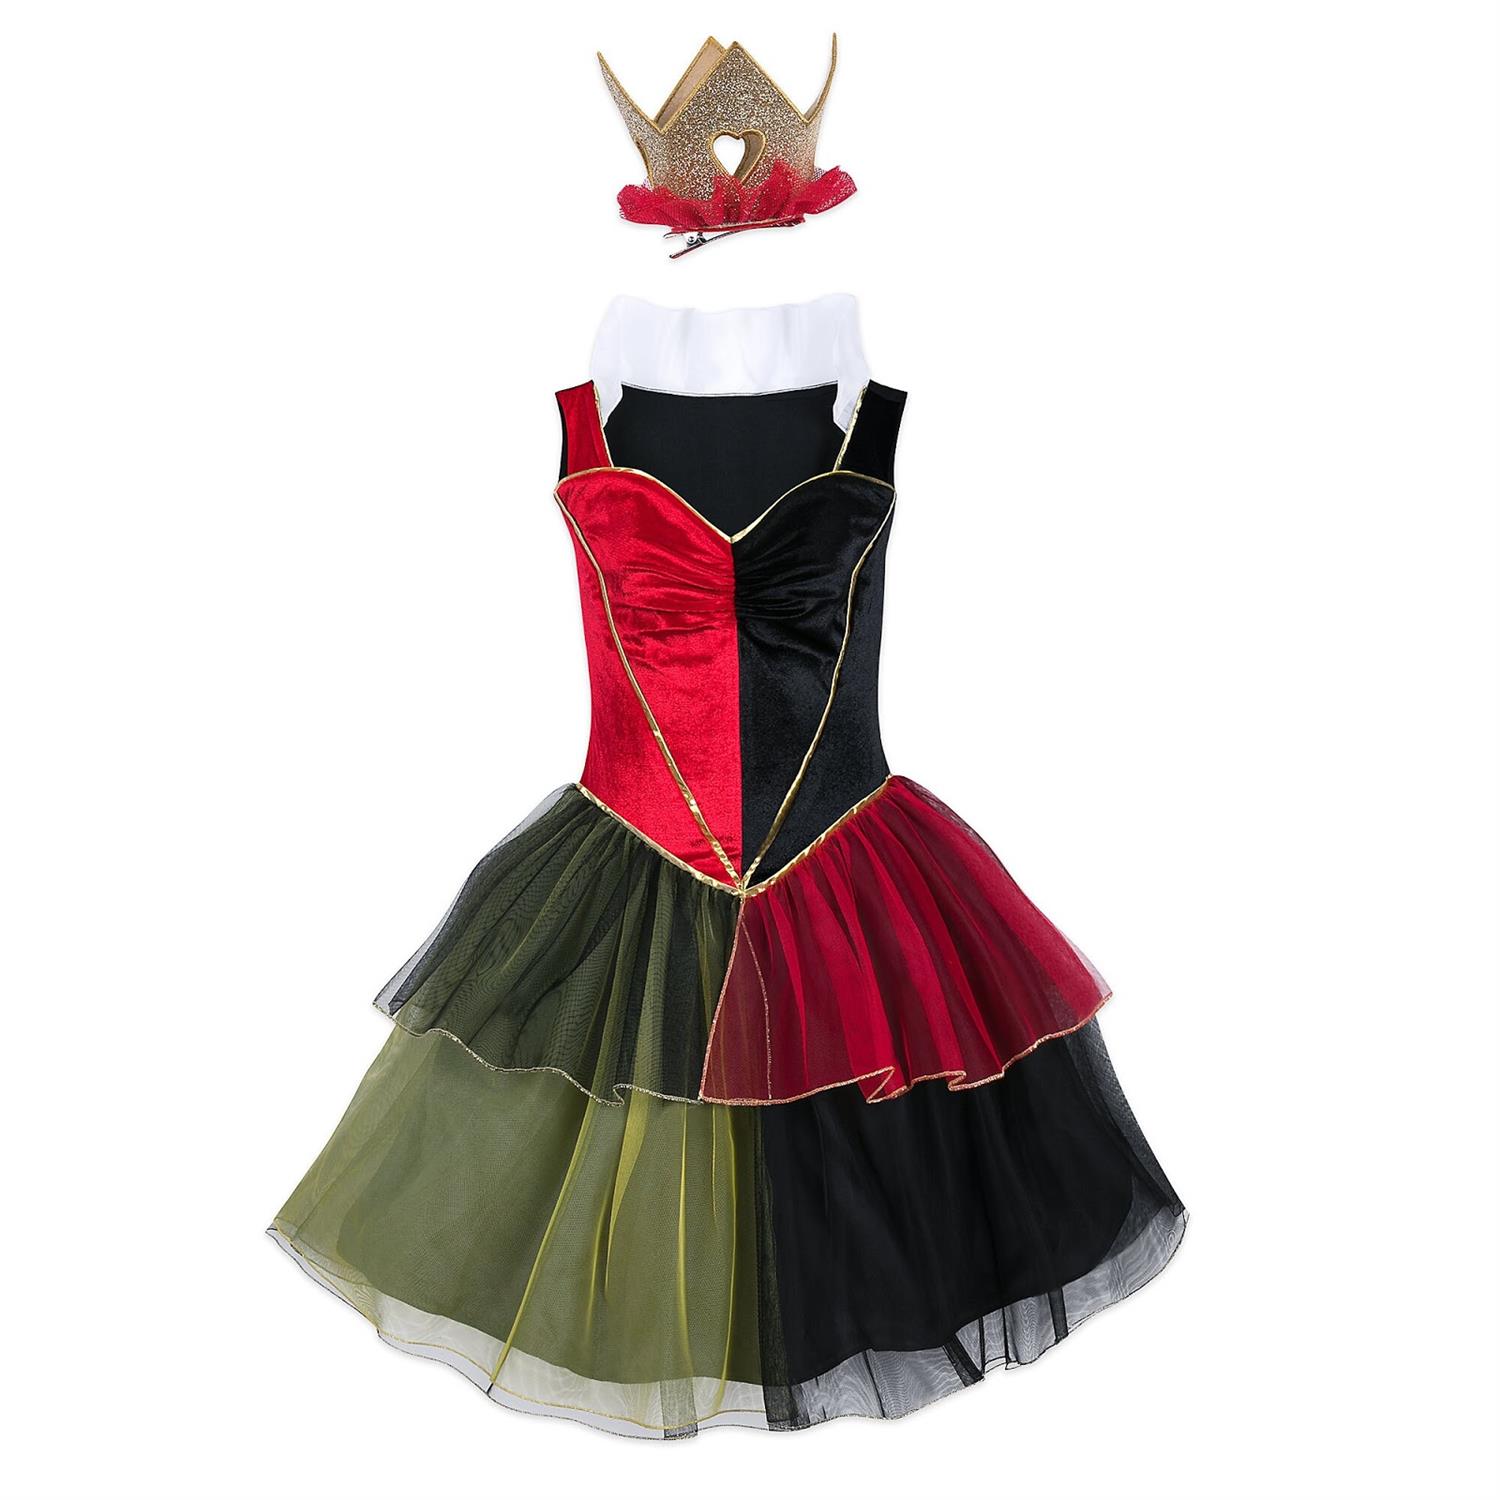 Prepare for Halloween With Disney-Themed Adult Costumes on shopDisney